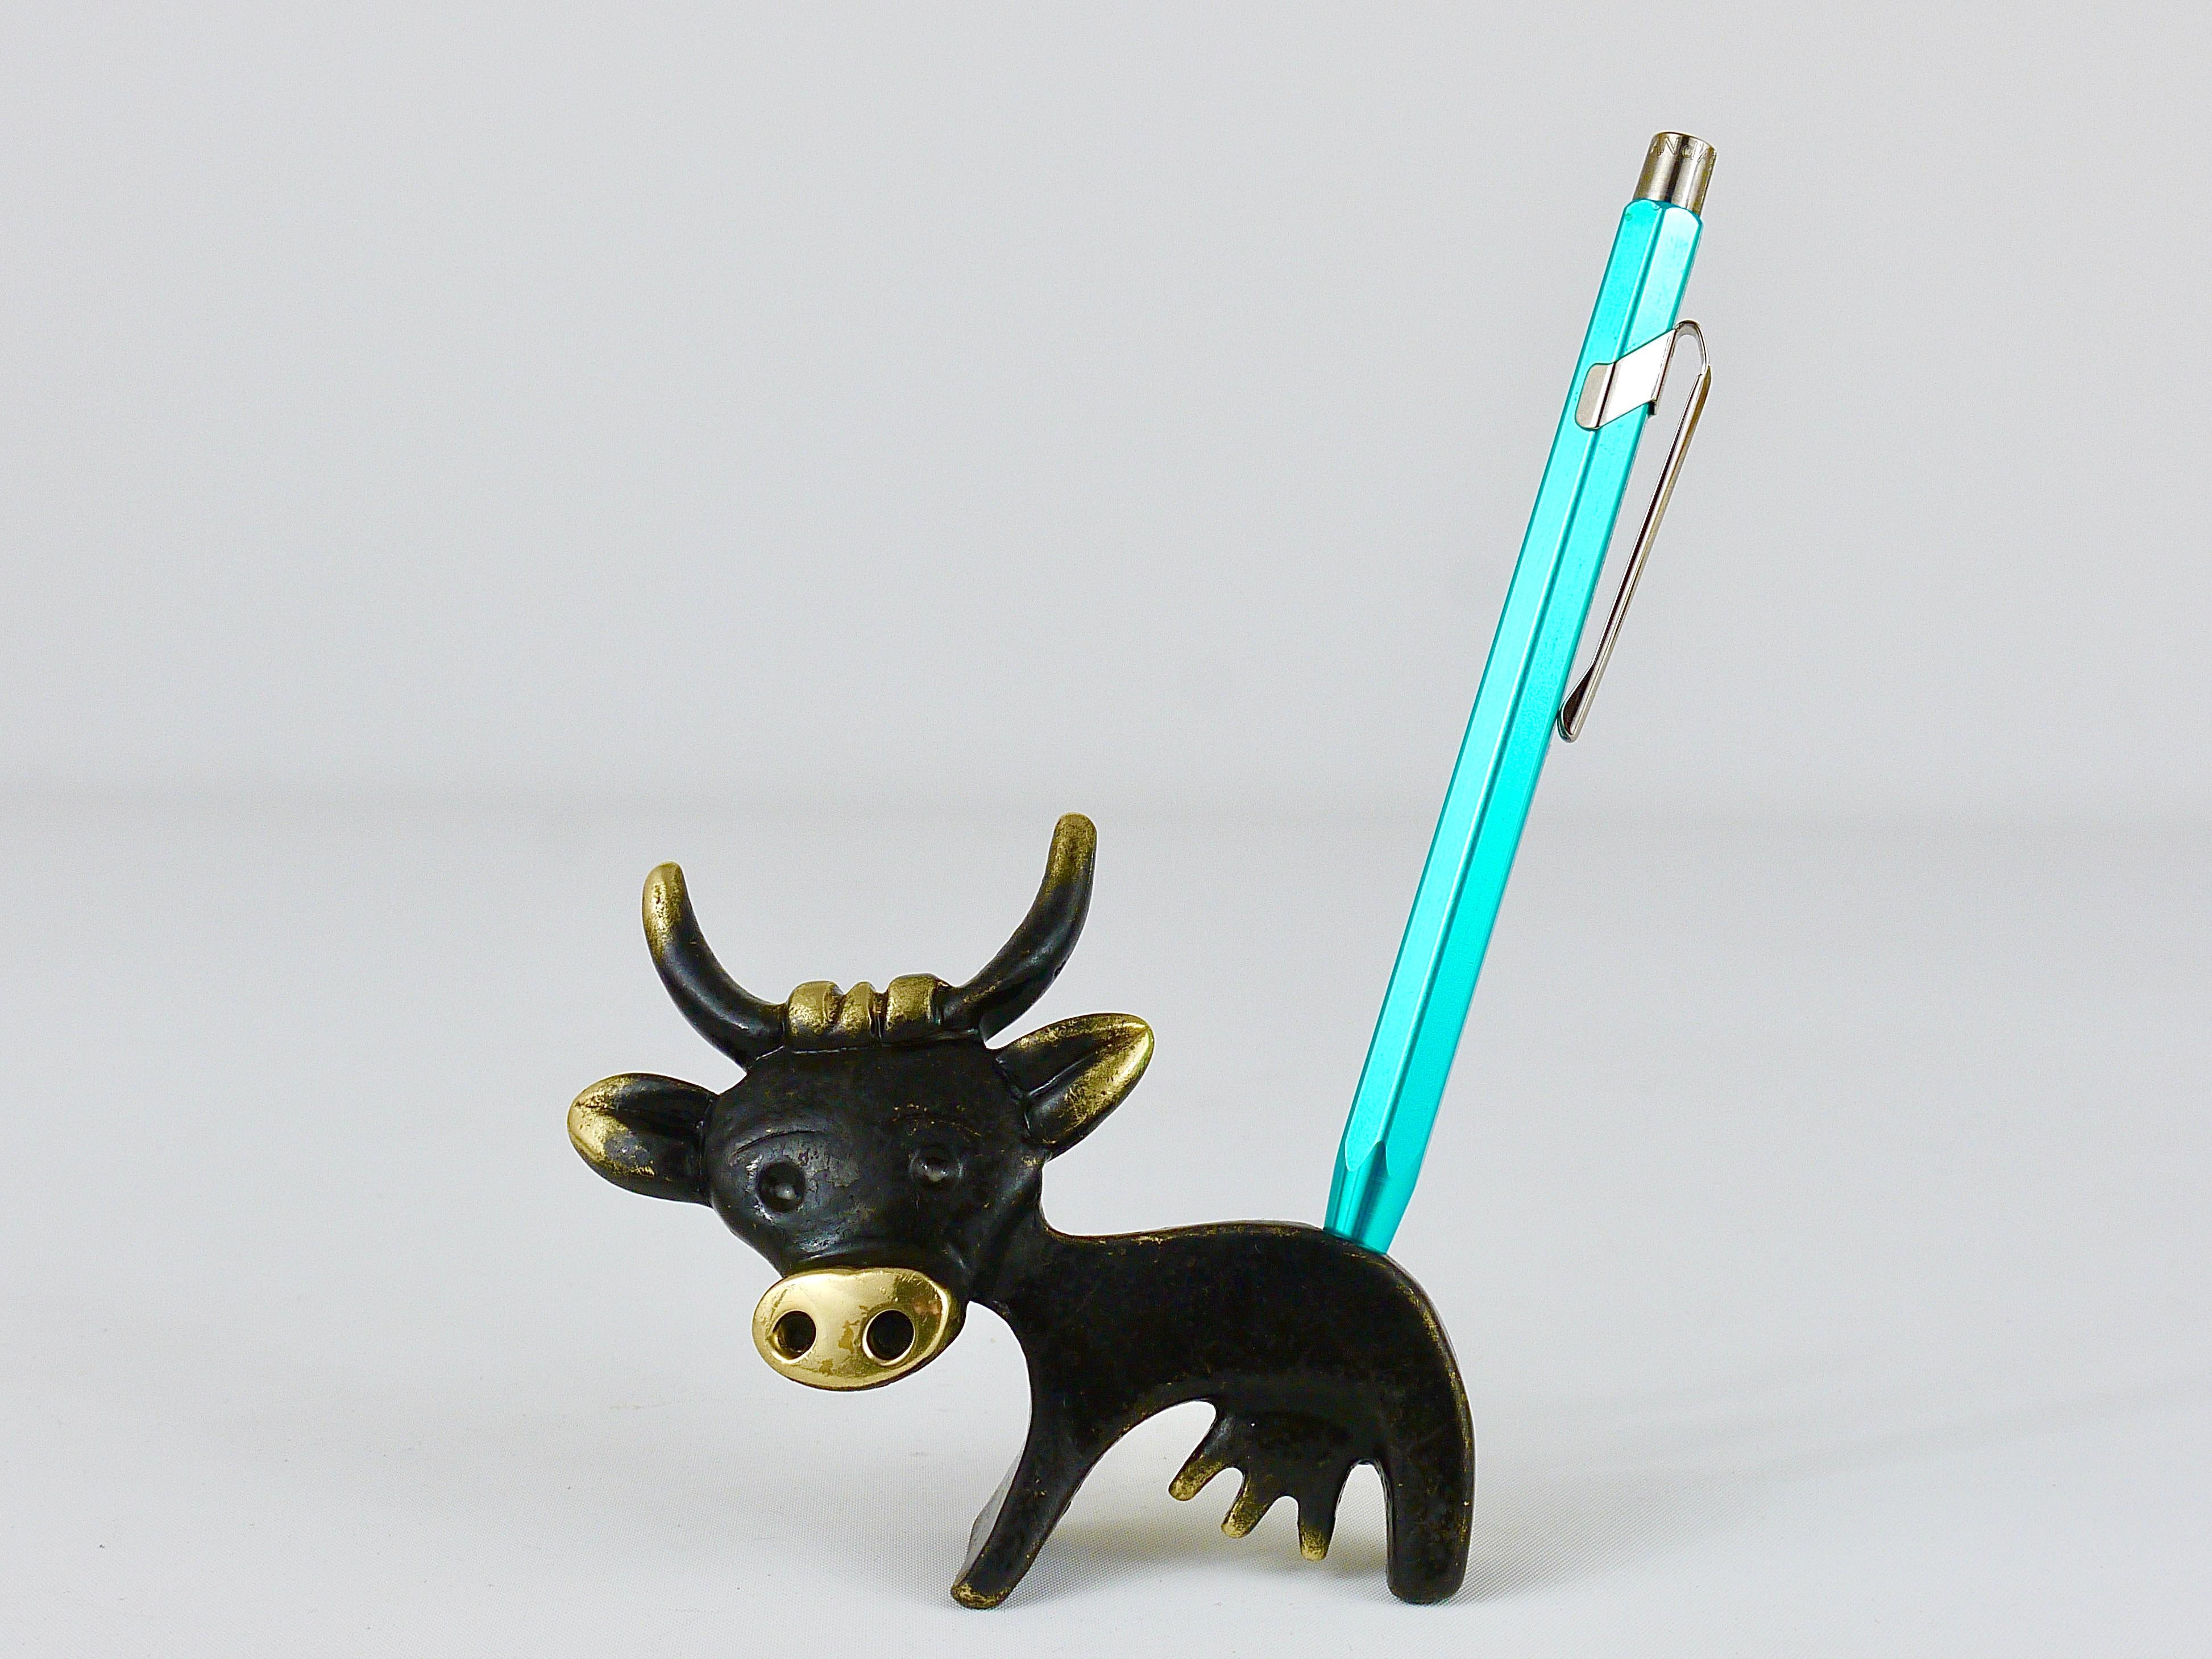 A very charming Austrian midcentury pen or pencil holder sculpture, displaying a cow. A very humorous design by Walter Bosse executed by Hertha Baller Austria in the 1950s. Made of brass, in good condition with charming patina.